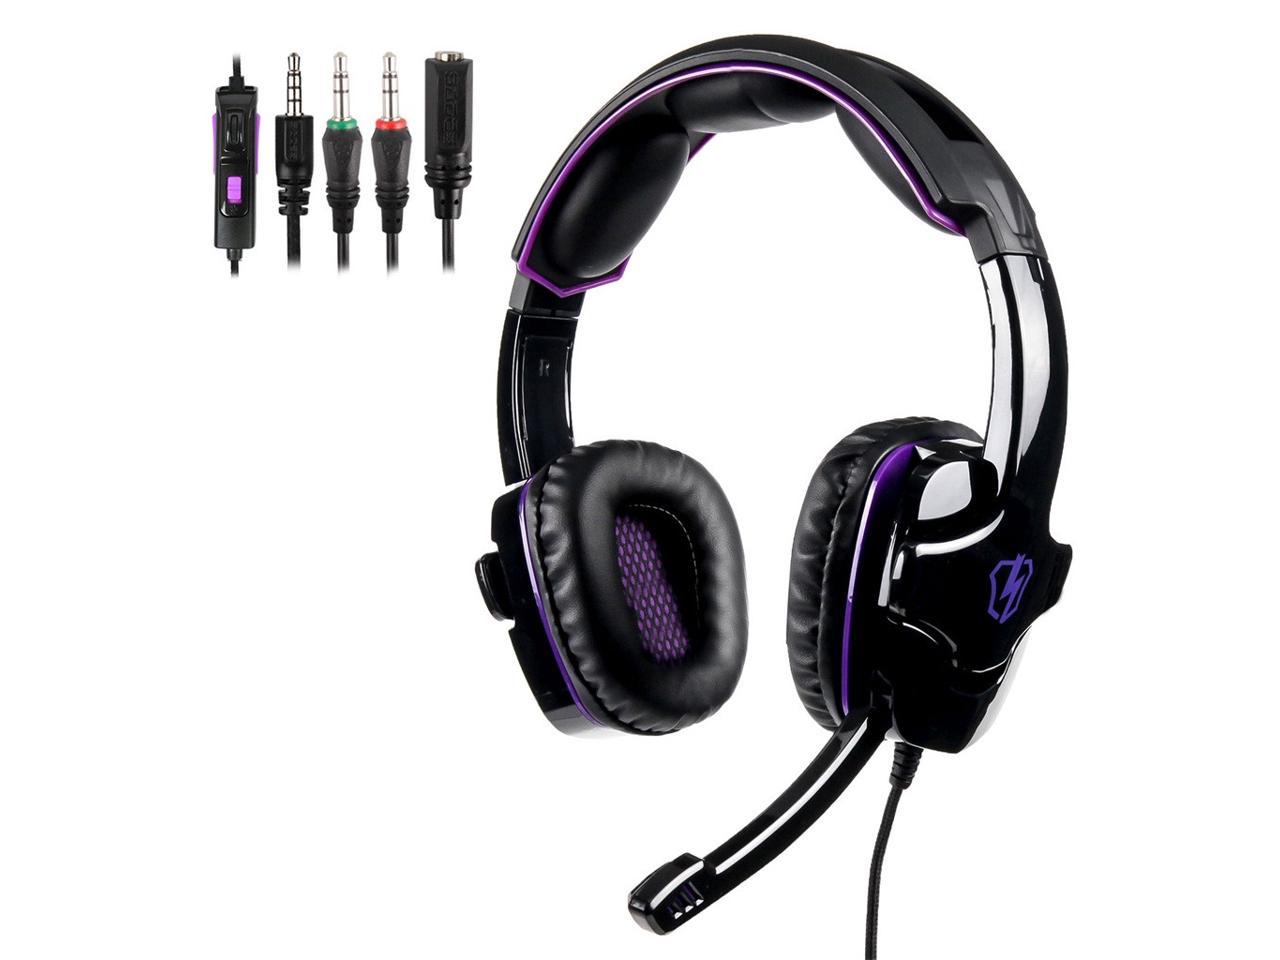 LETTON L8 Stereo Gaming Headset Headphone Noise Cancelling Microphone Compatible with PC PS4 Xbox One Nintendo Switch Phone Tablet